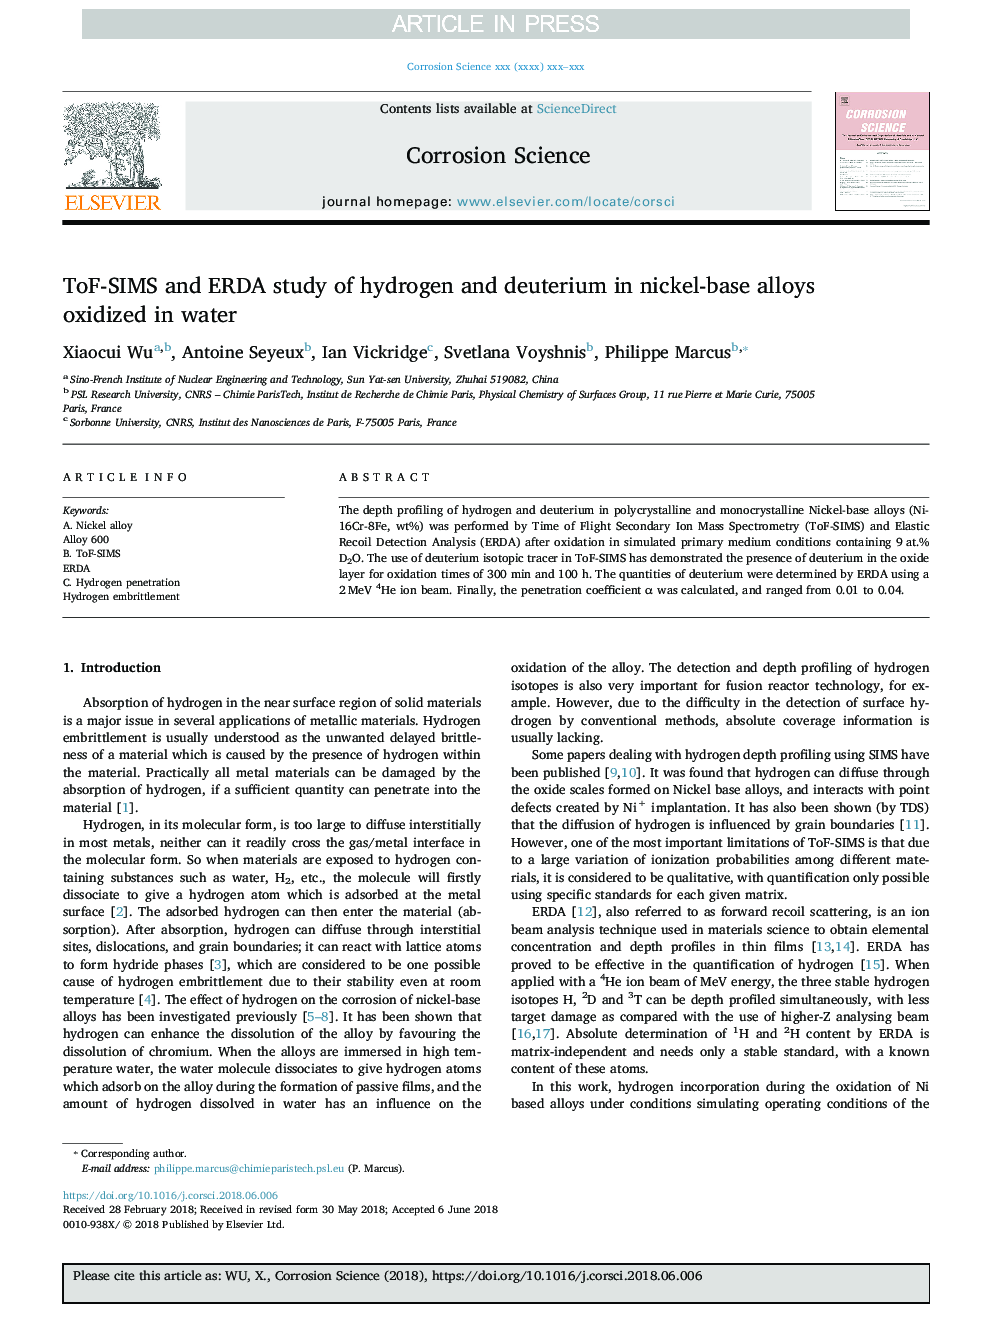 ToF-SIMS and ERDA study of hydrogen and deuterium in nickel-base alloys oxidized in water